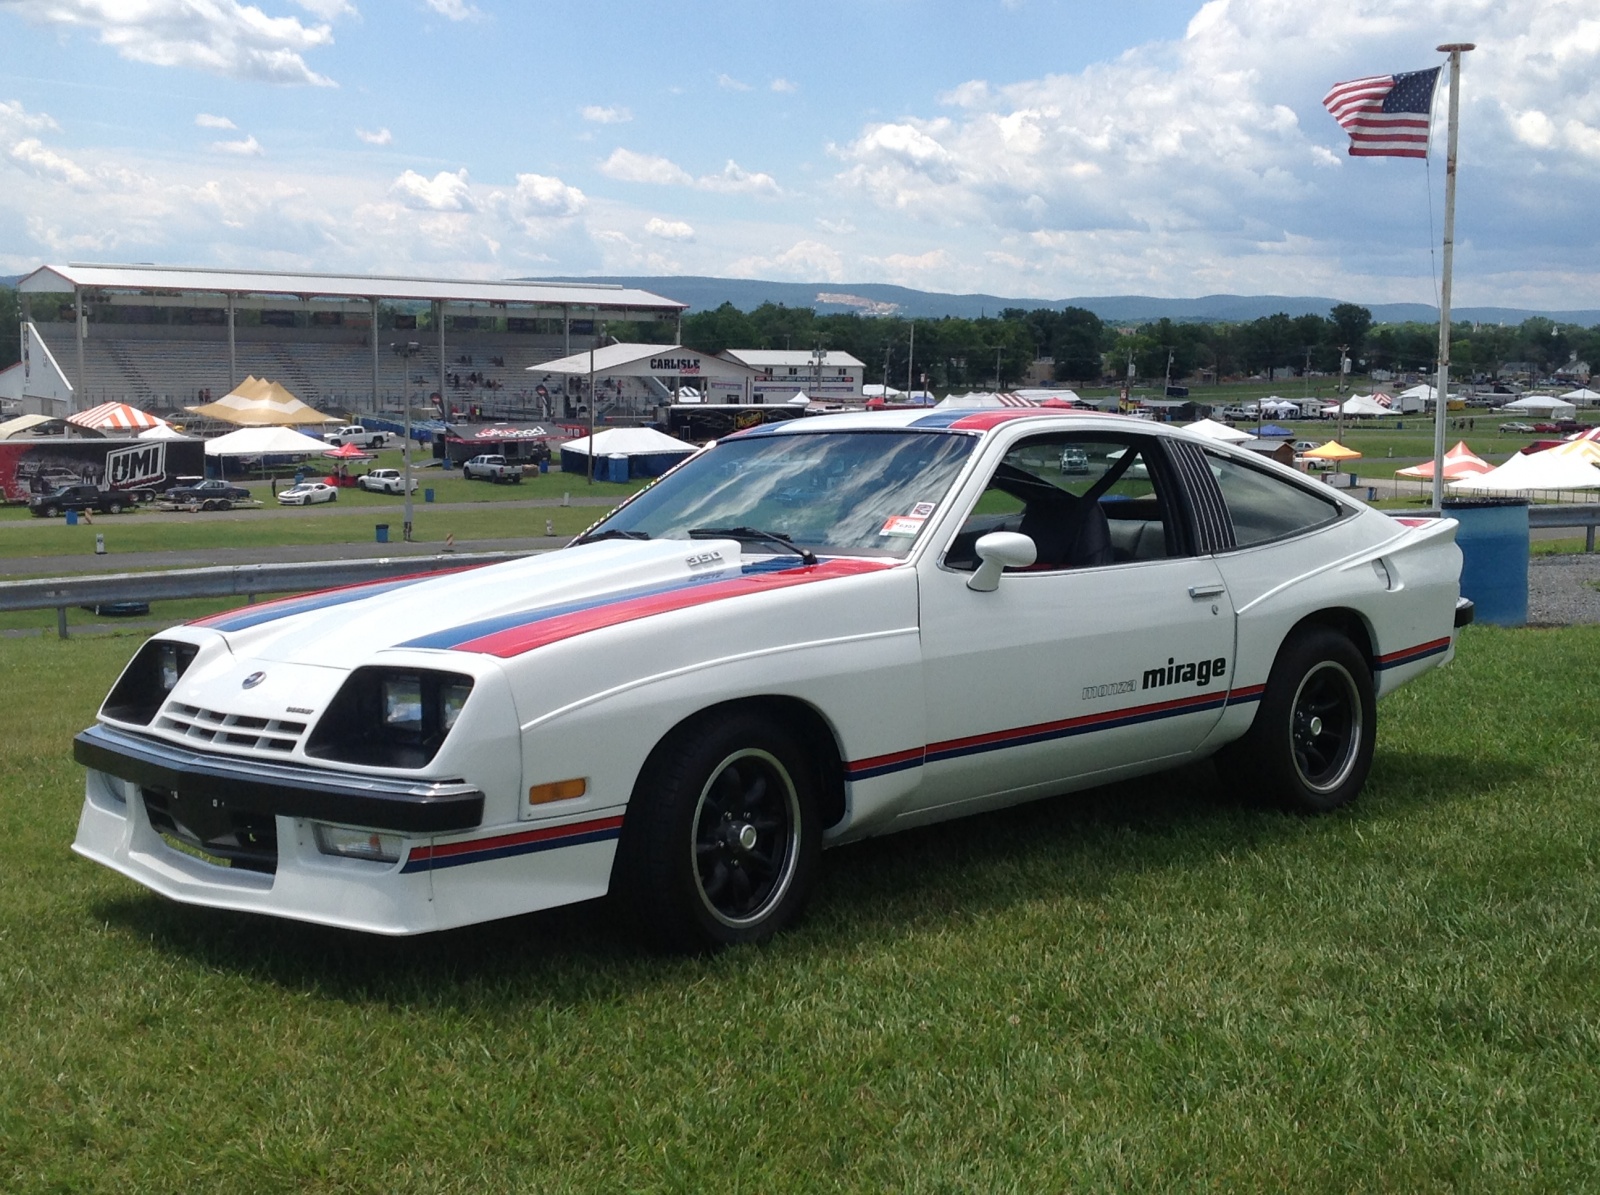 Chevrolet and Carlisle Events just featured the 40th Anniversary of the Mon...